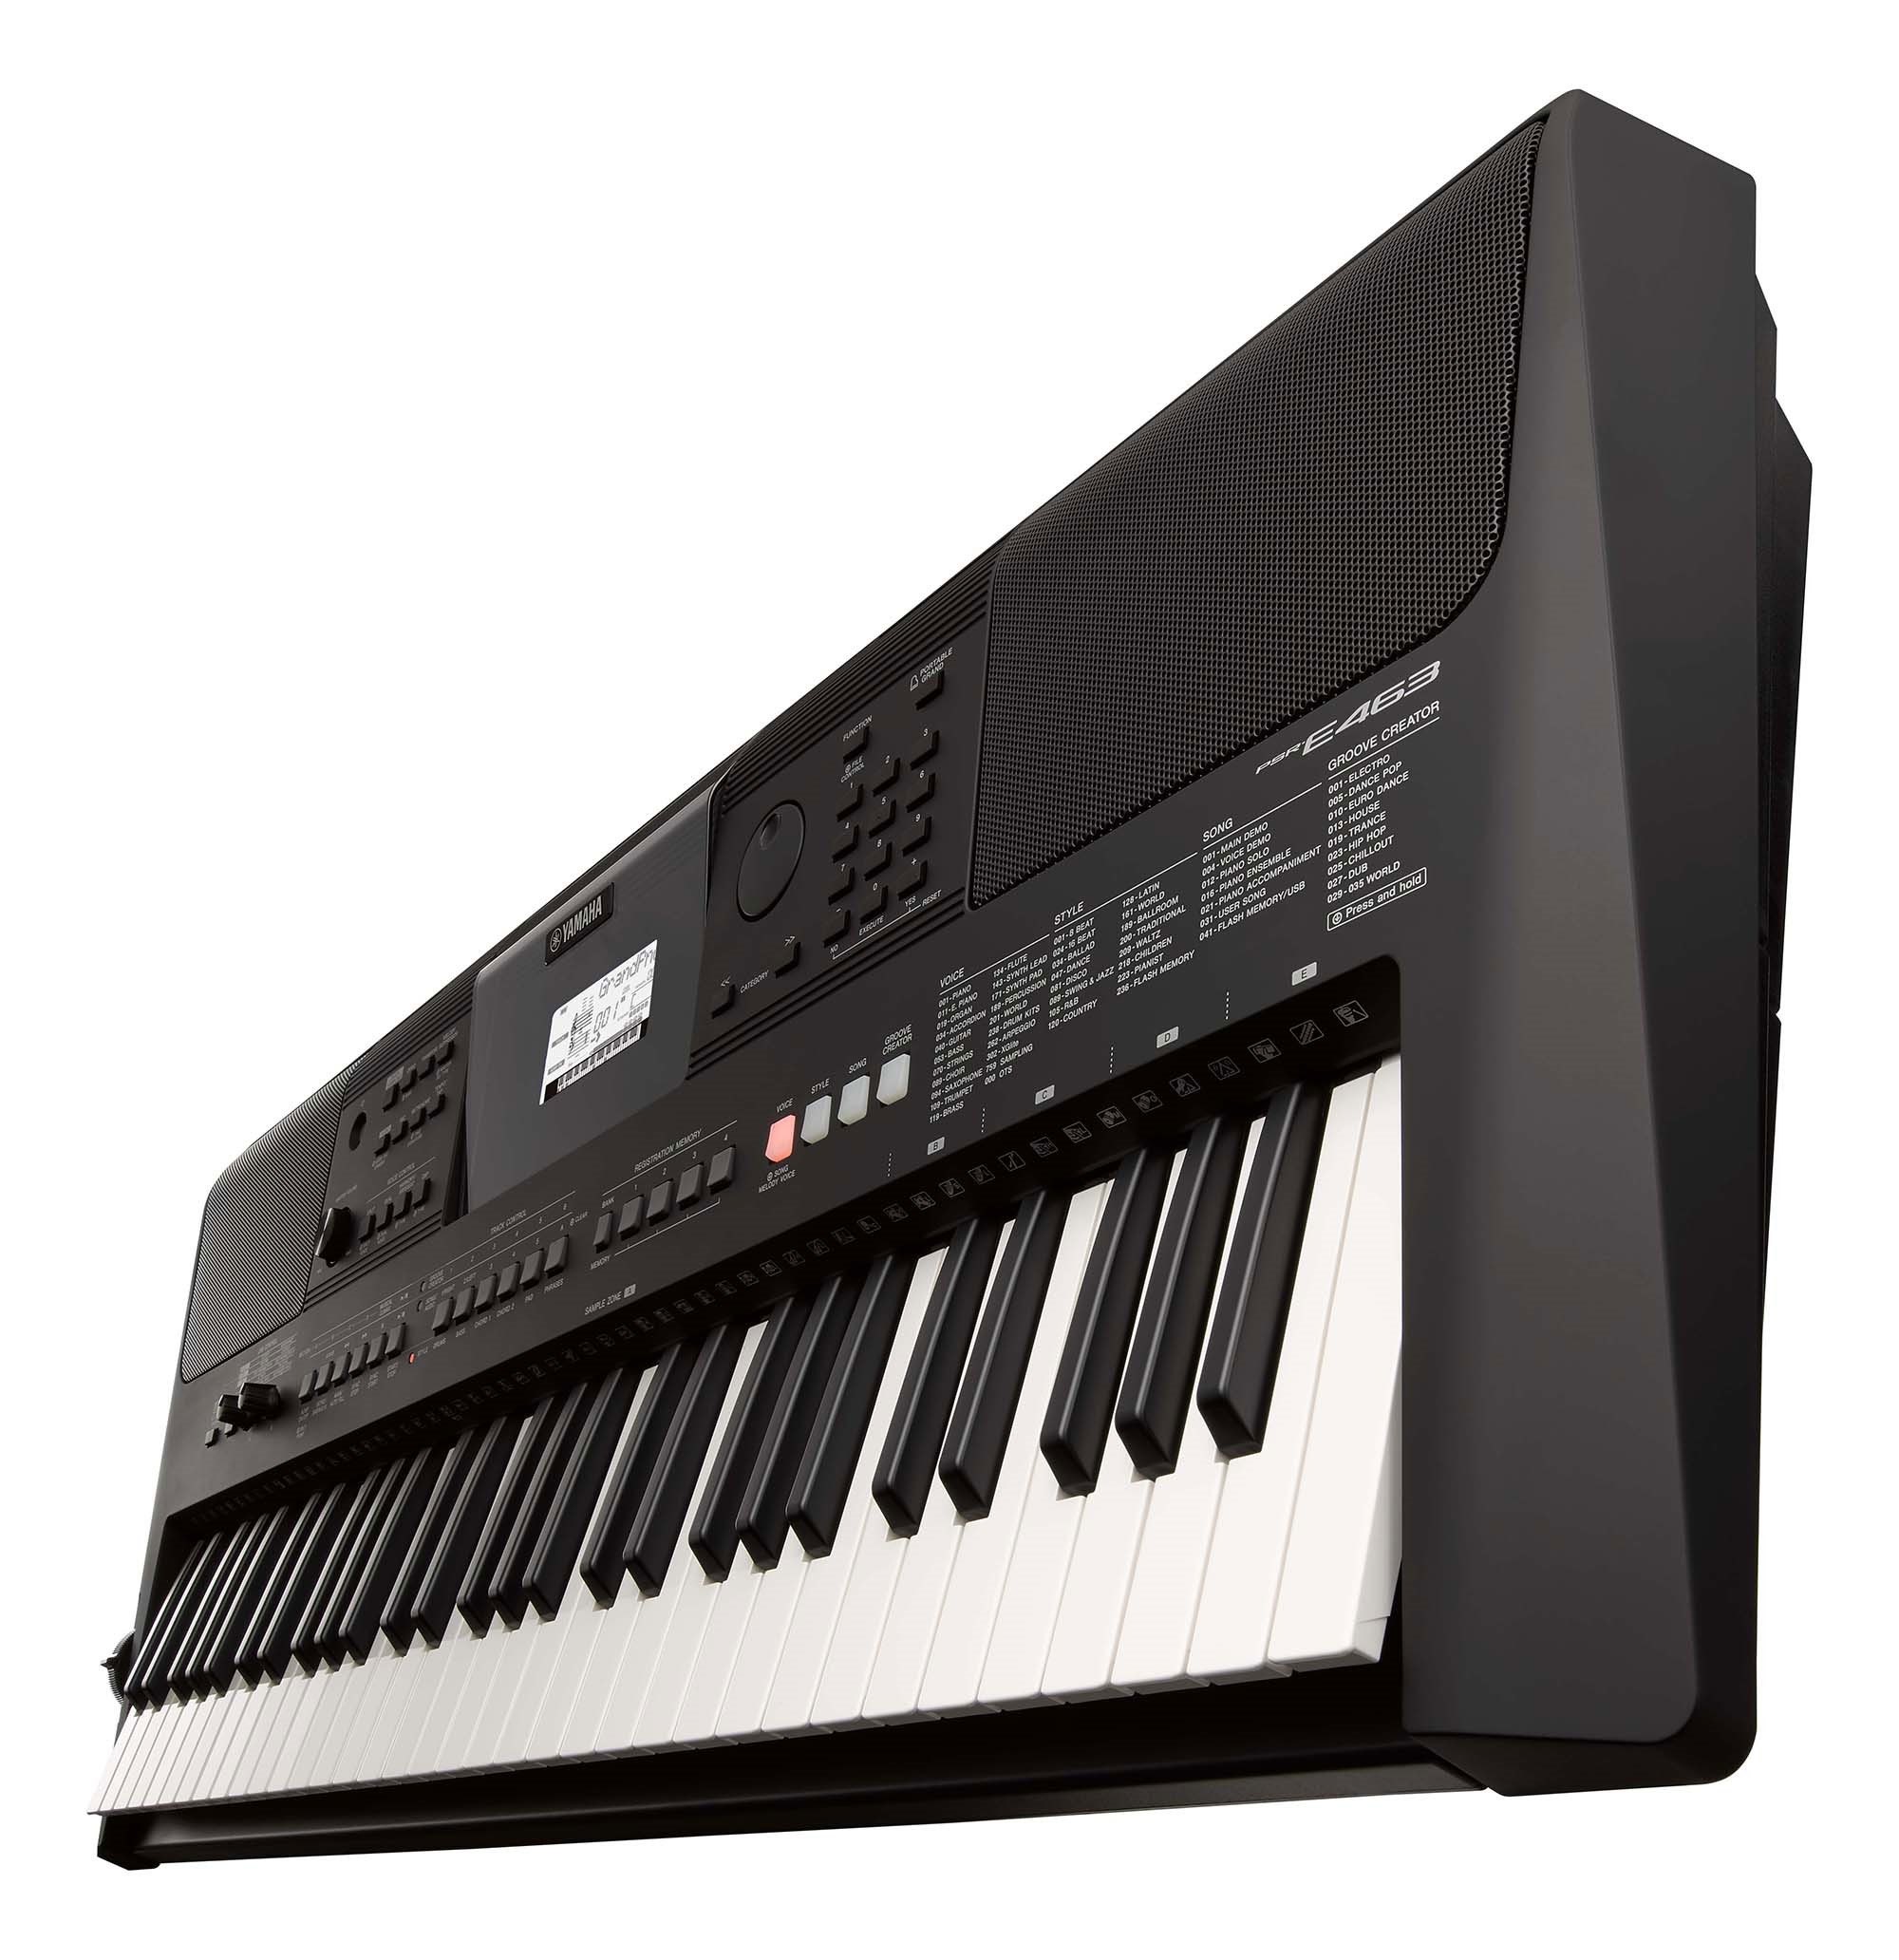 PSR-E463 - Overview - Portable Keyboards - Keyboard Instruments 